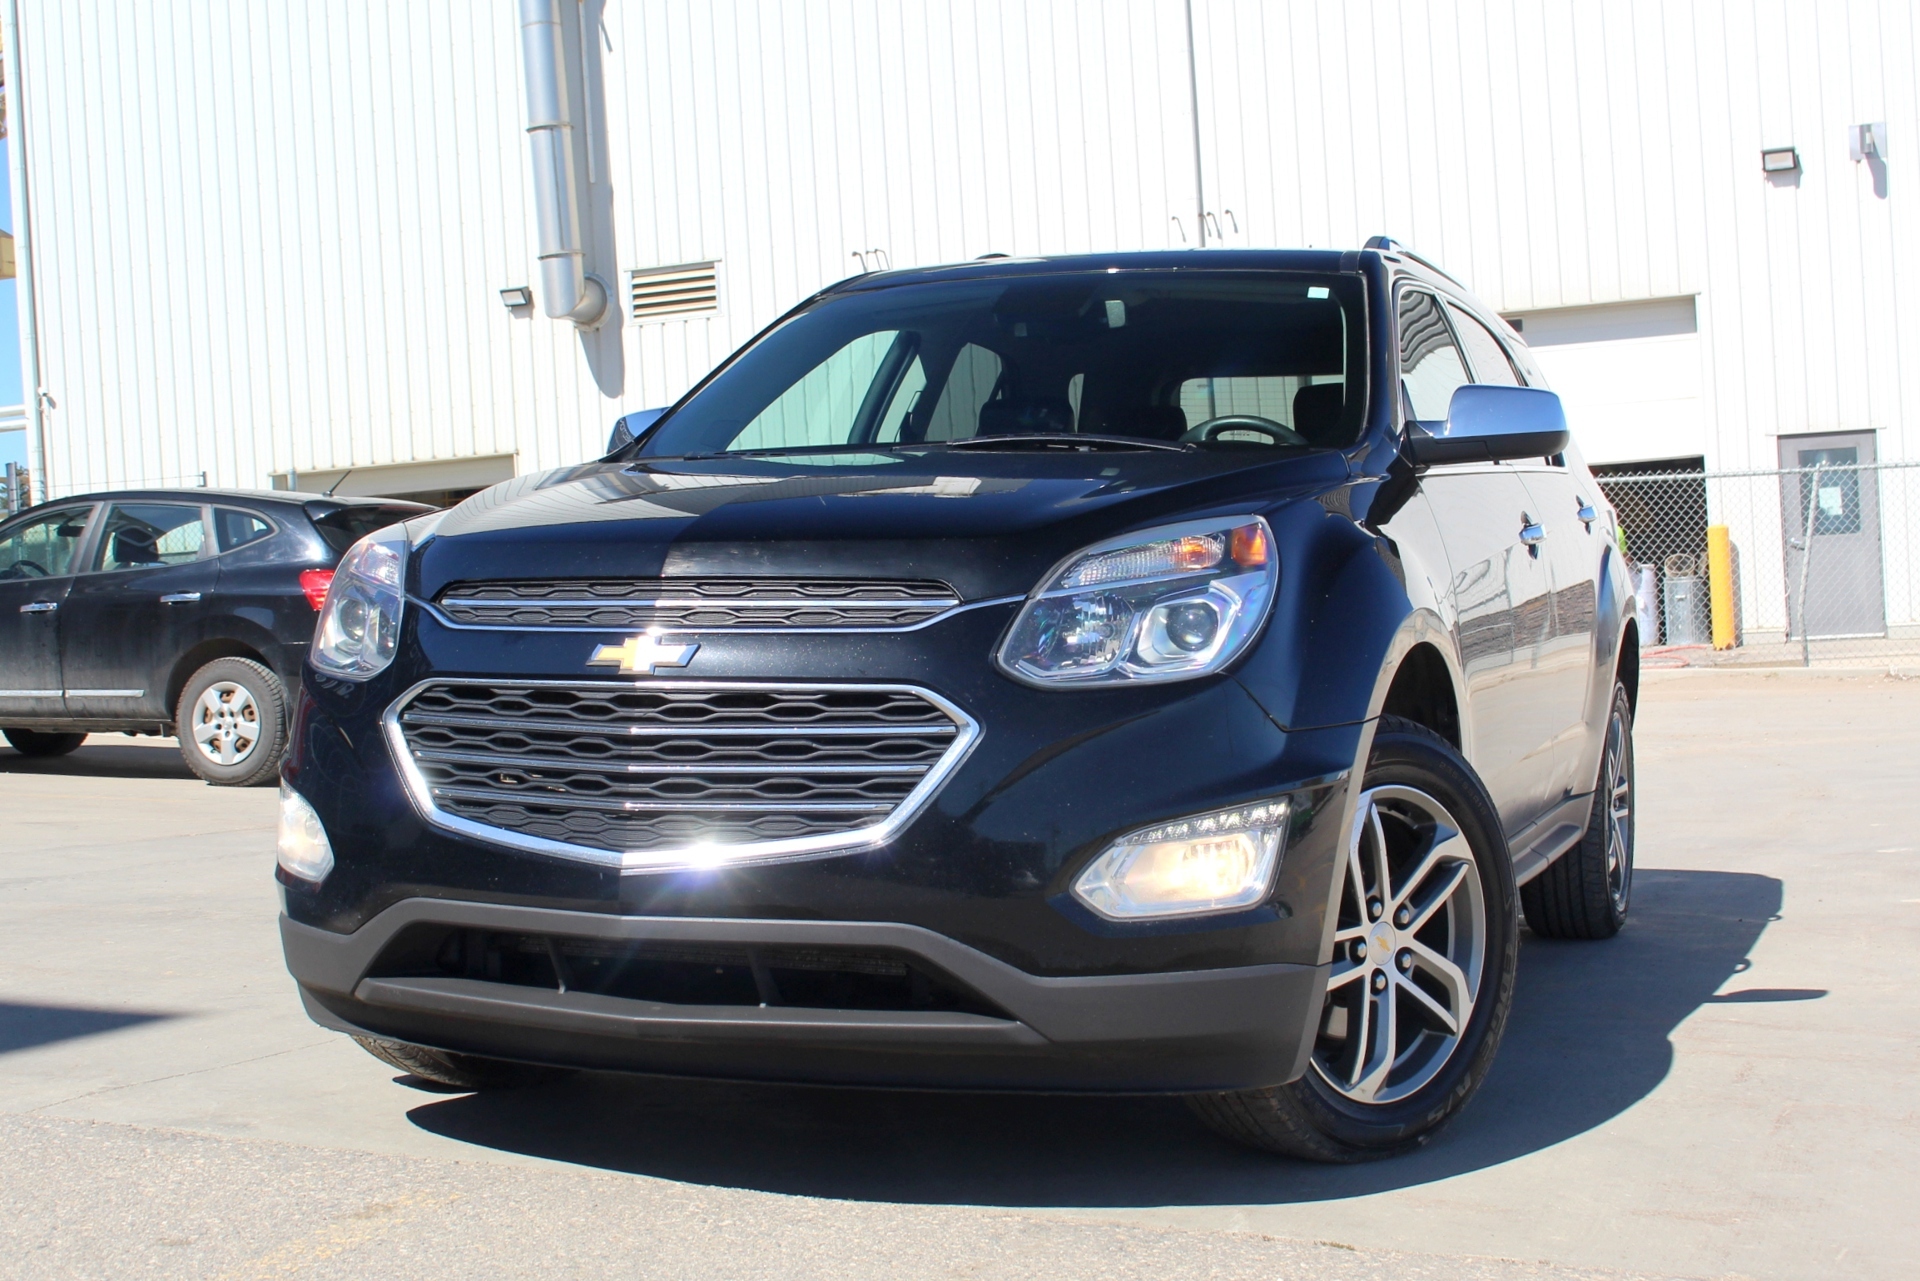 2017 Chevrolet Equinox Premier - AWD - TOP OF THE LINE